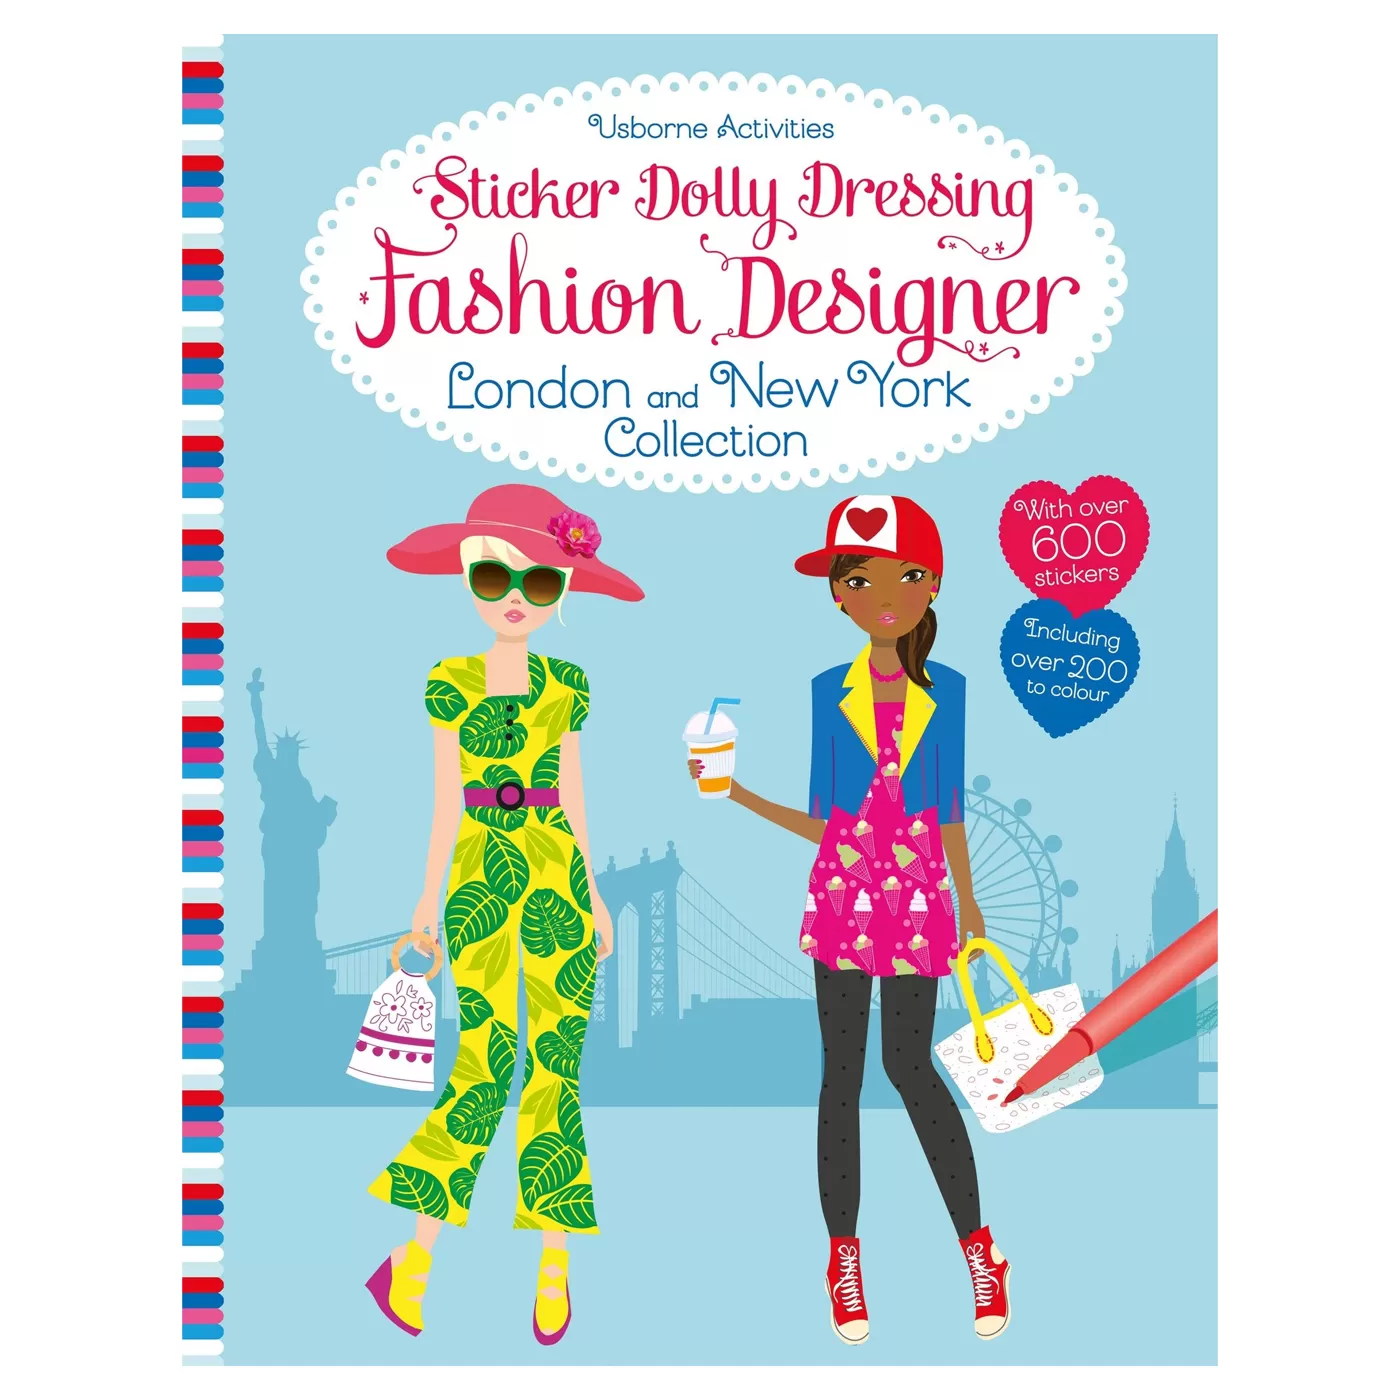  Sticker Dolly Dressing Fashion Designer London and New York Collection